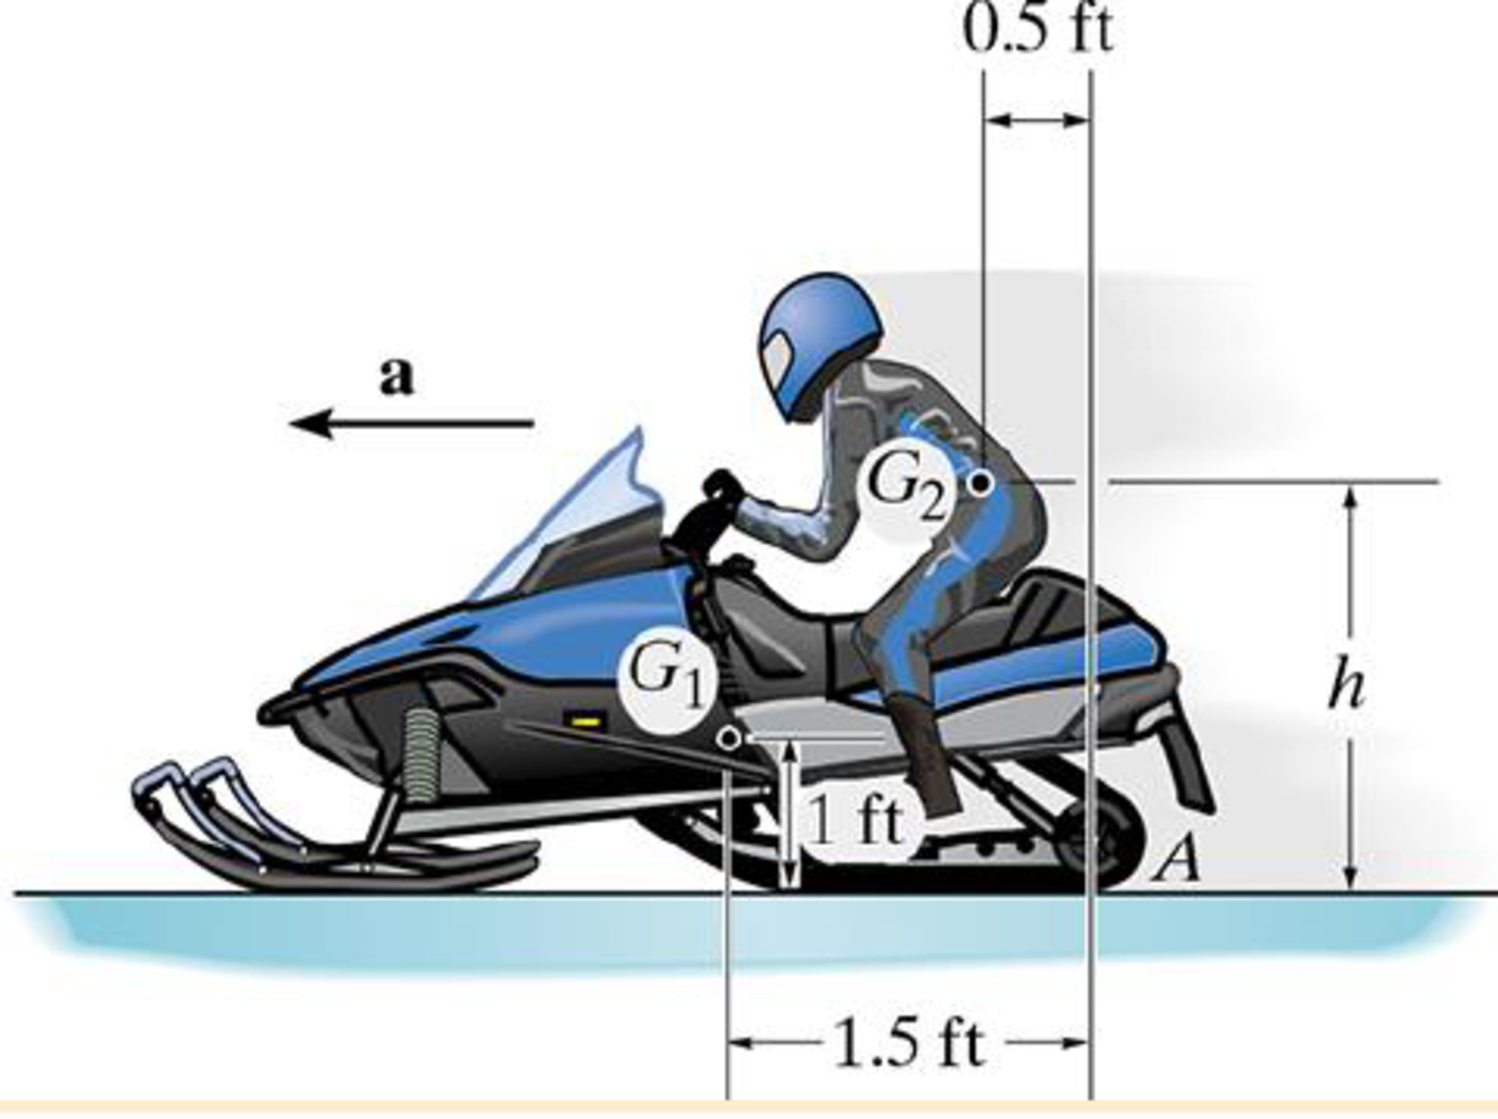 Chapter 17.3, Problem 47P, If the acceleration is a = 20 ft/s2, determine the maximum height h of G2 of the rider so that the 